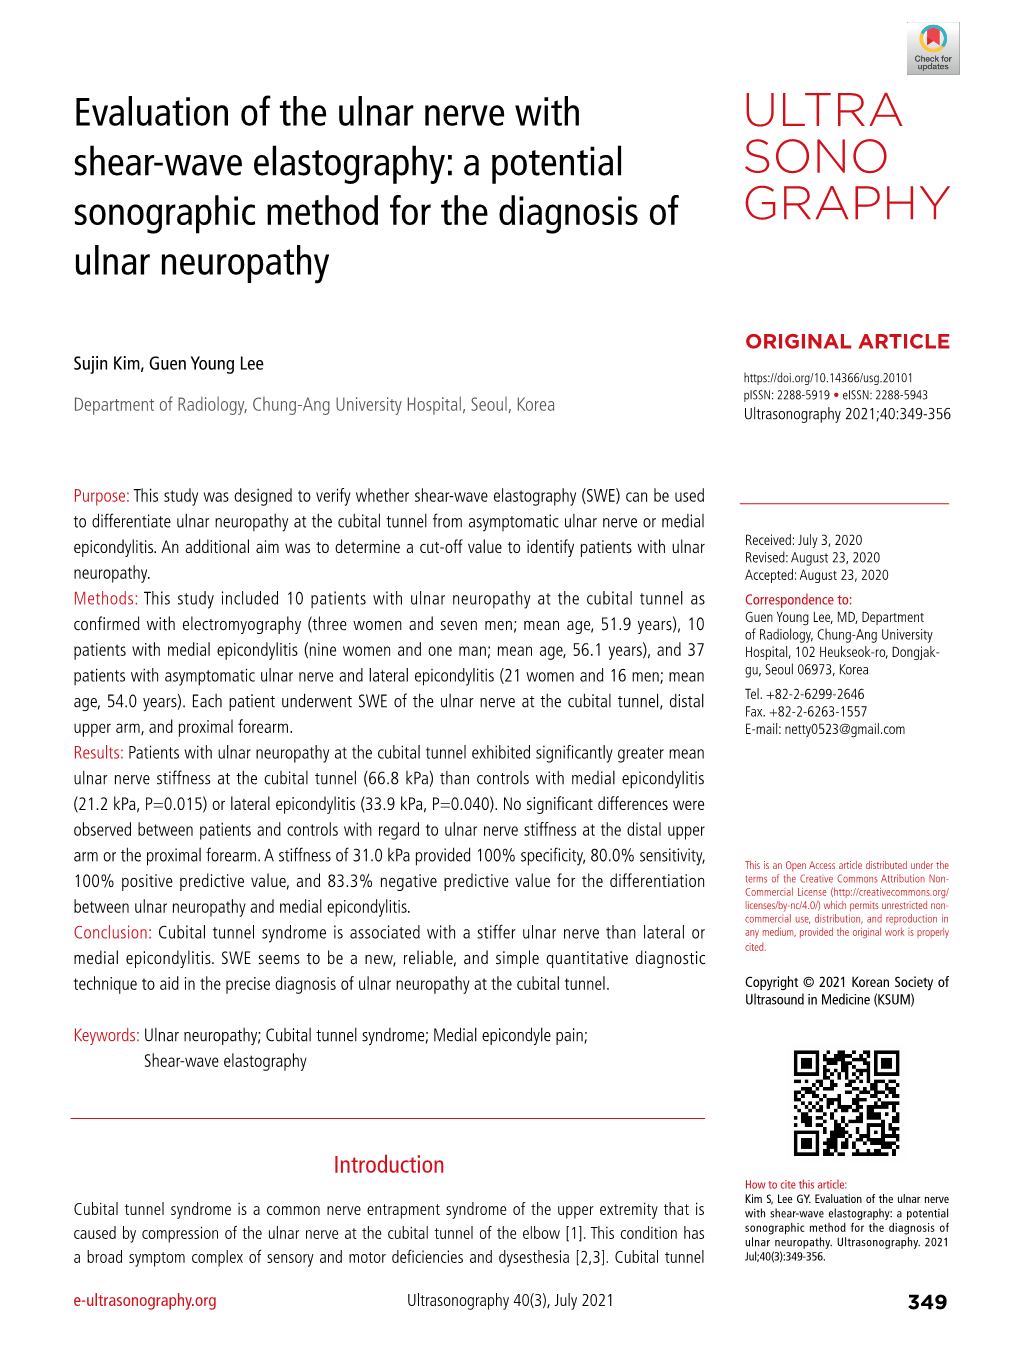 Evaluation of the Ulnar Nerve with Shear-Wave Elastography: a Potential Sonographic Method for the Diagnosis of Ulnar Neuropathy